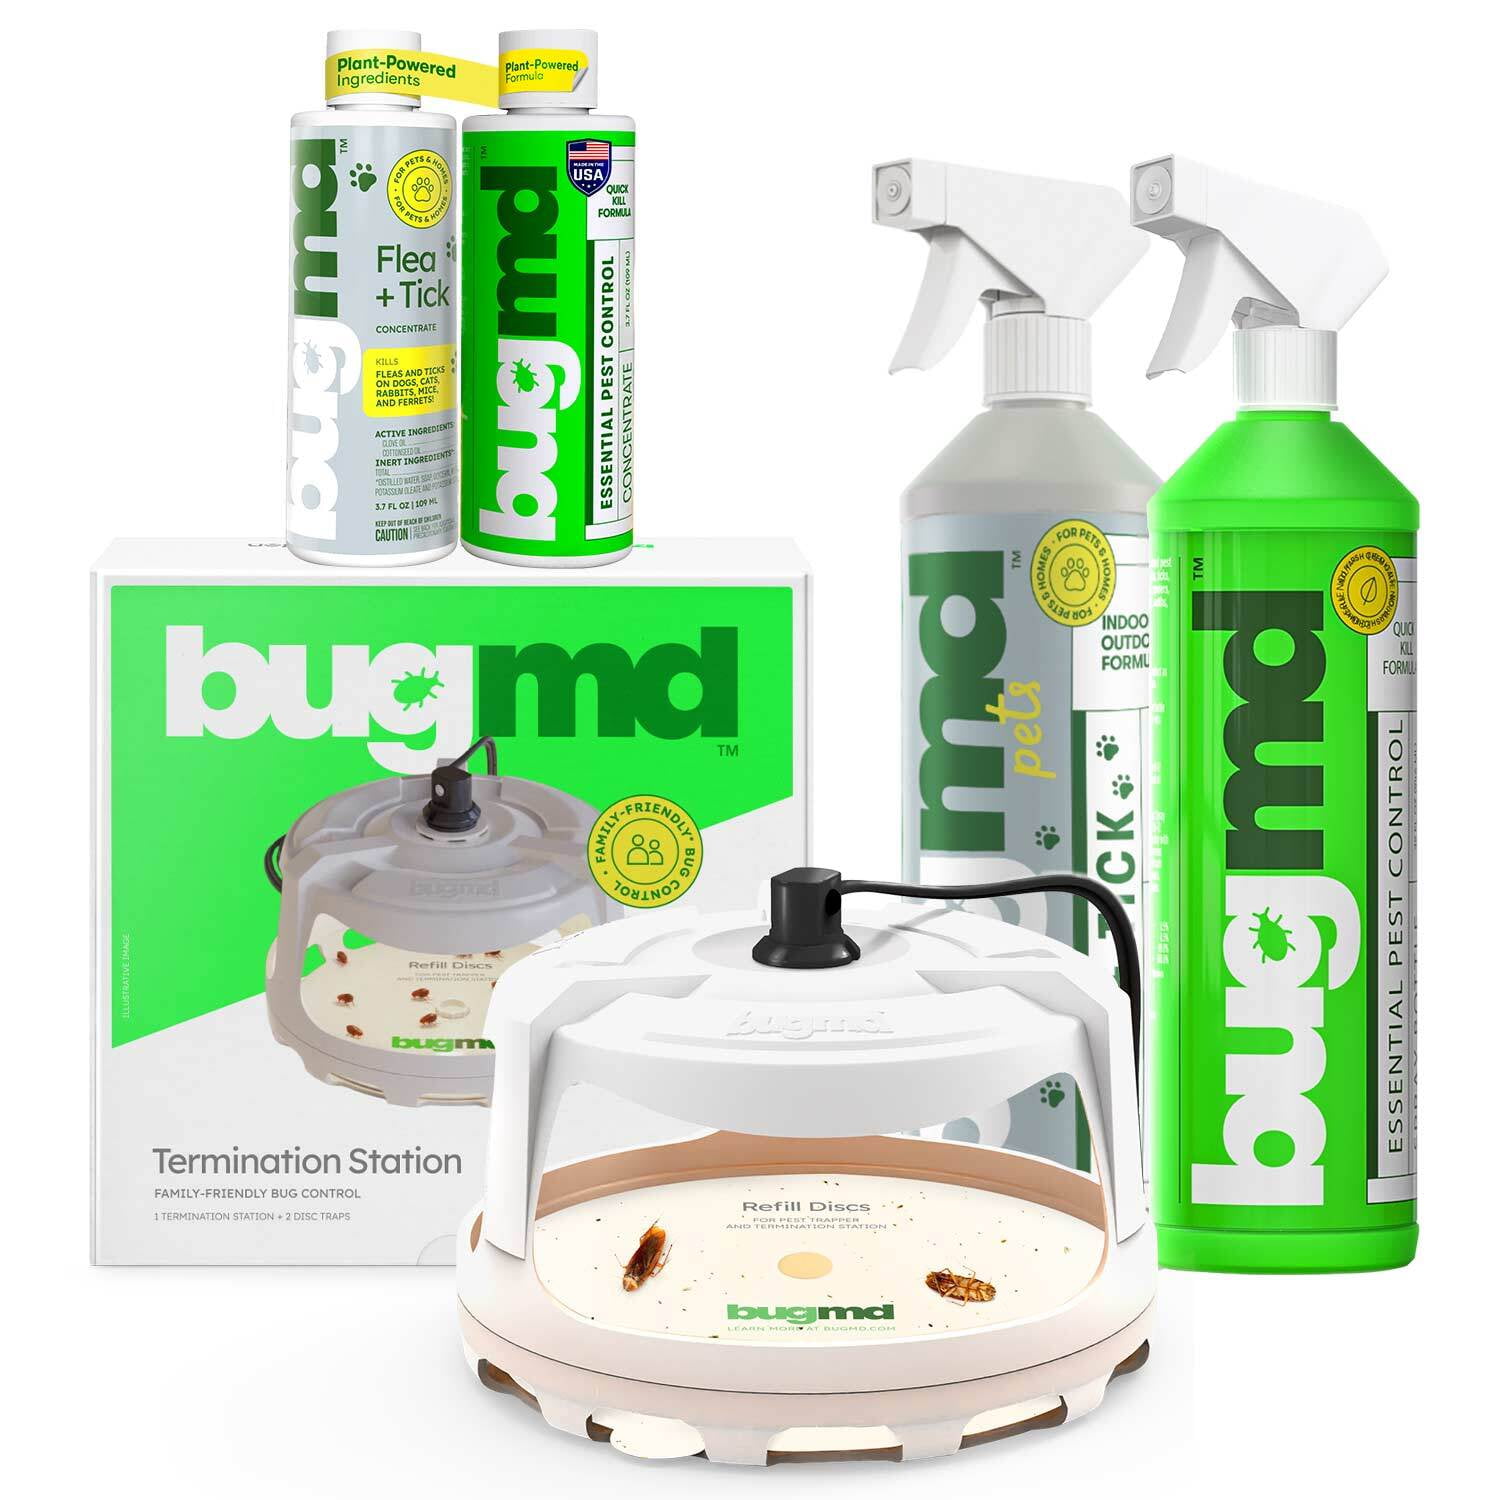 BUGMD Flea and Tick Concentrate (1 Pack), BugMD Essential Pest Control  Concentrate (1 Pack), BugMD Termination Station (1 Pack) and Spray Bottle  32 oz